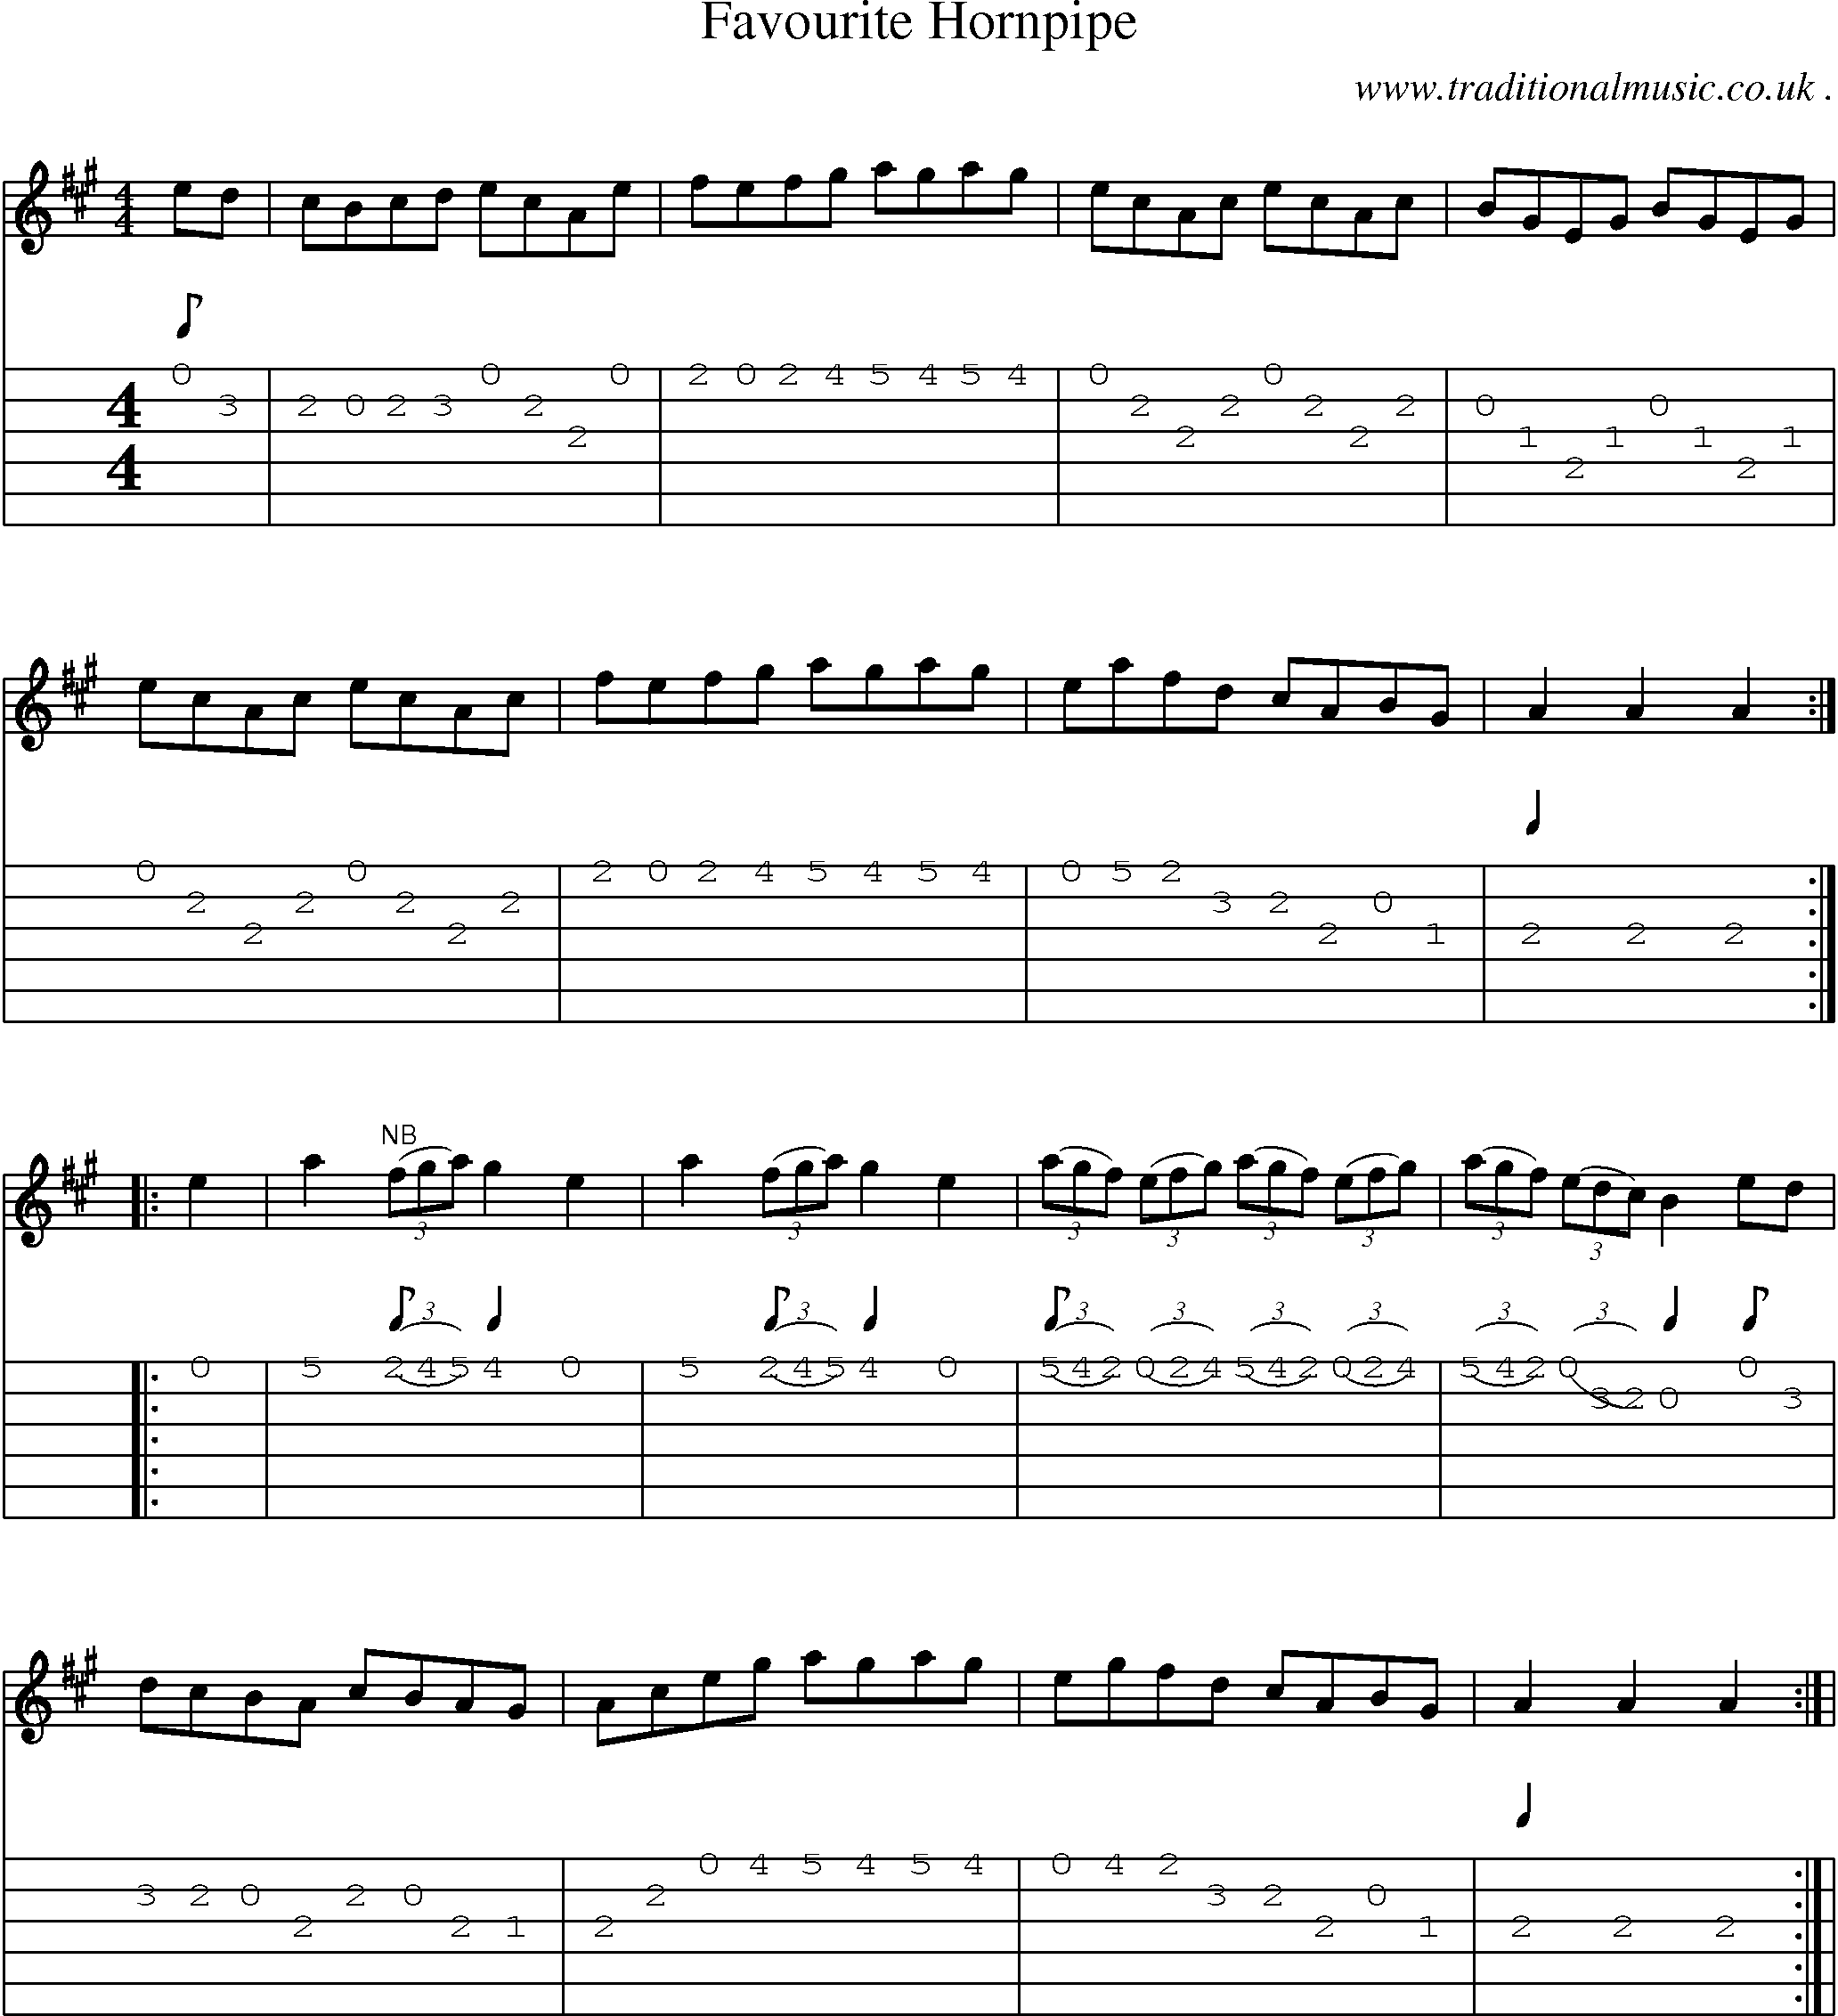 Sheet-Music and Guitar Tabs for Favourite Hornpipe